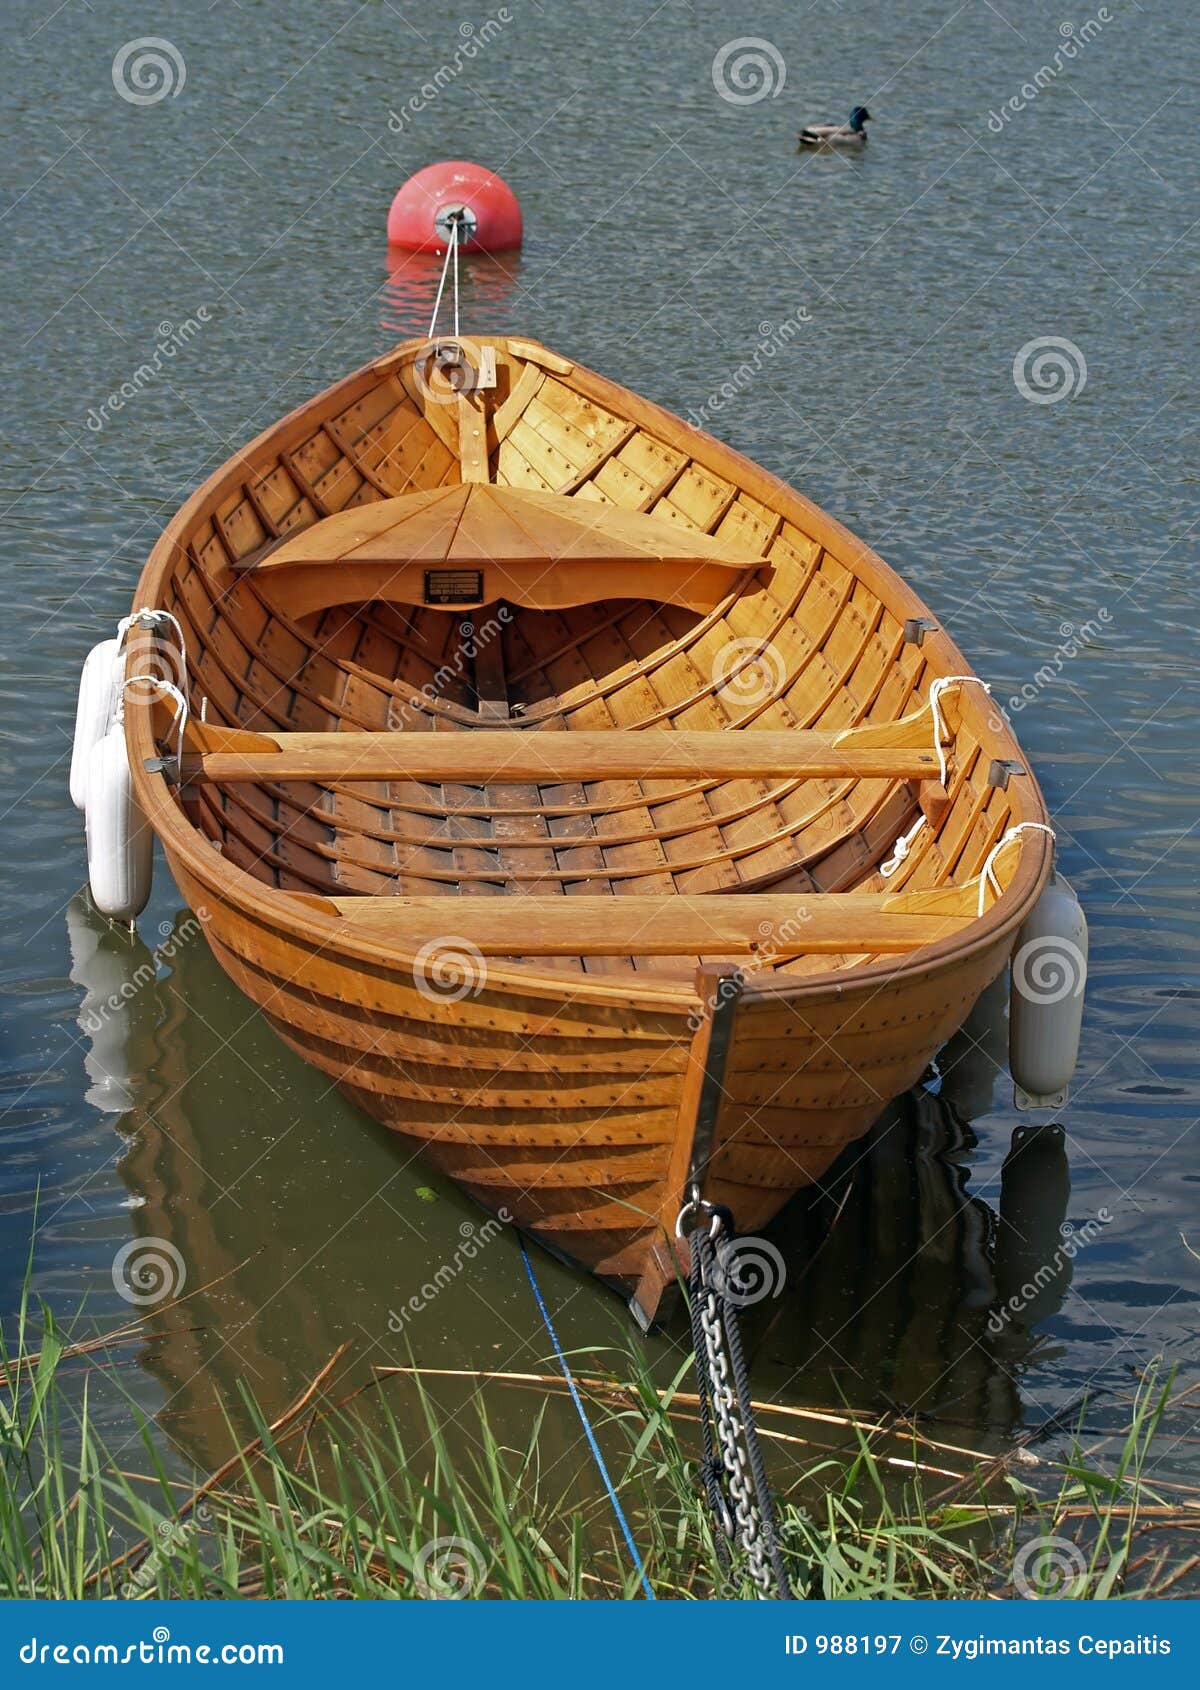 Wooden Rowing Boat Royalty Free Stock Photography - Image 